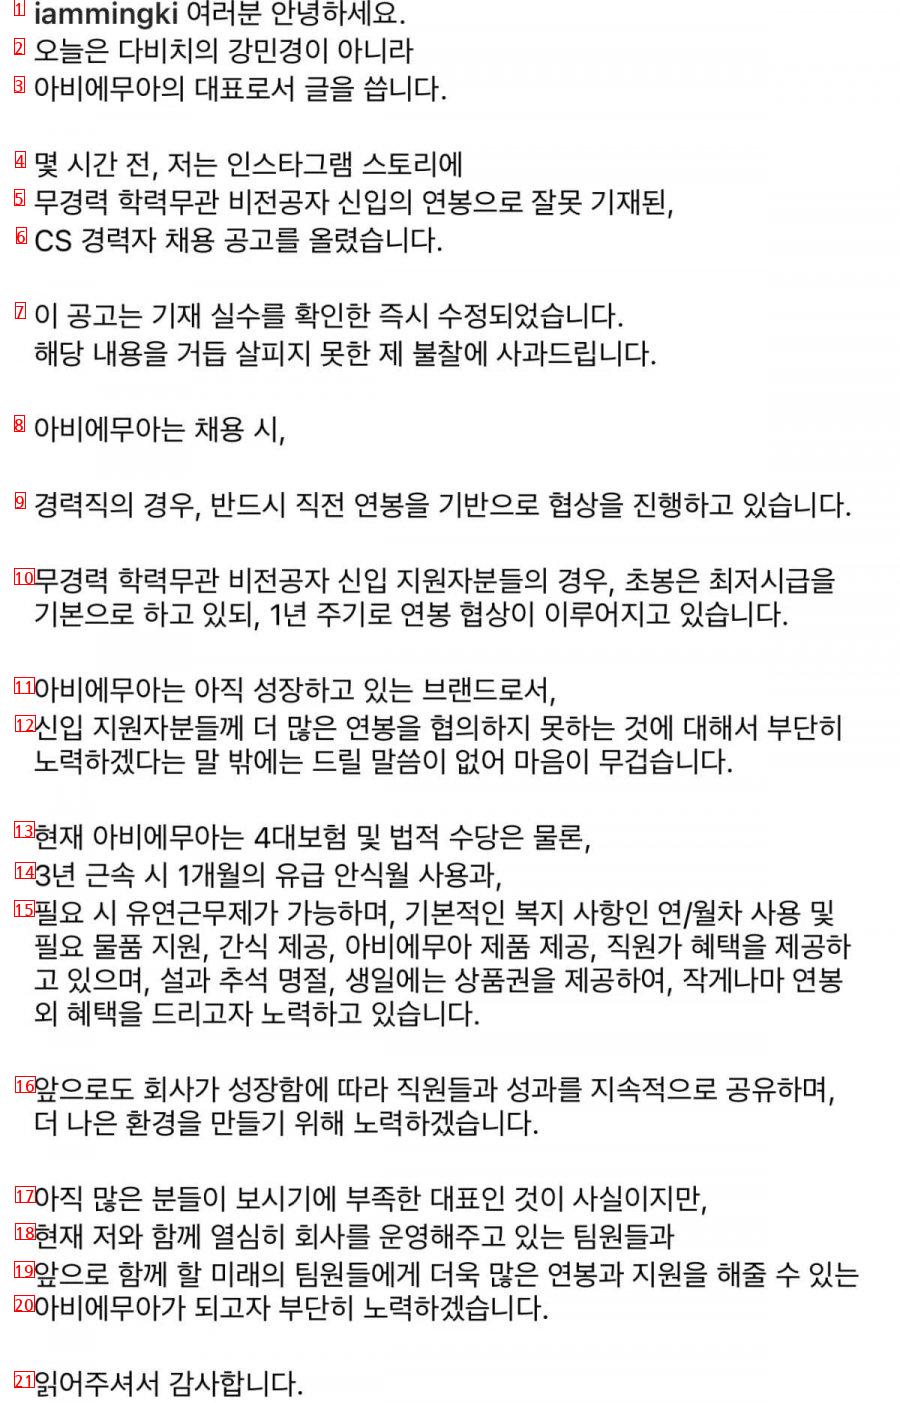 Kang Min-kyung just posted an apology for the controversy over the employee recruitment announcement on Instagram.jpg